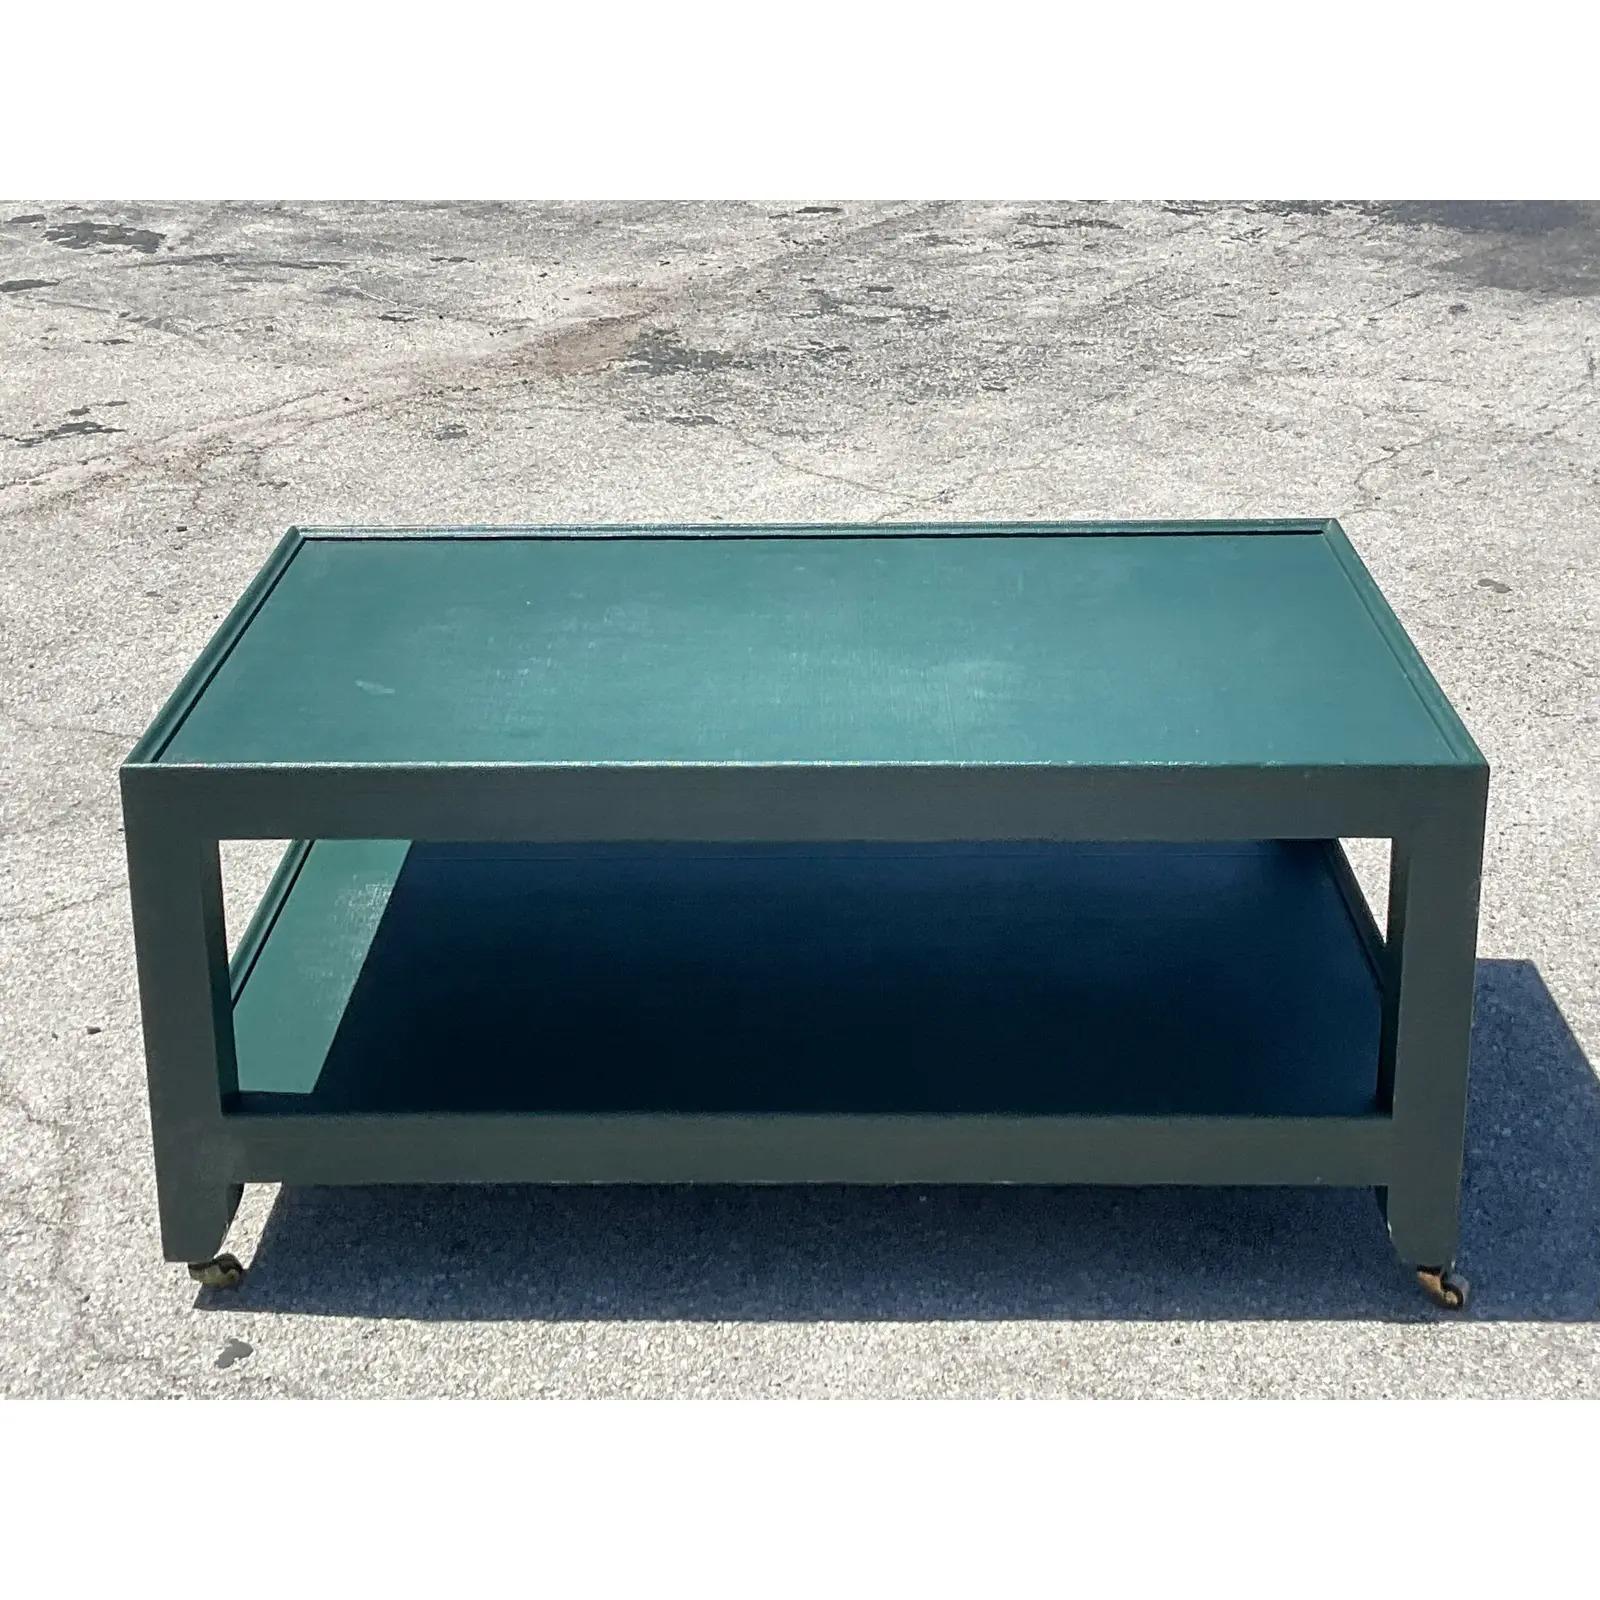 Incredible vintage Postmodern two tiered coffee table. Made by the iconic Karl Springer and signed on the bottom. A deep green lacquer on chic Grasscloth. Easily moves on casters. Acquired from a Gulfstream estate.